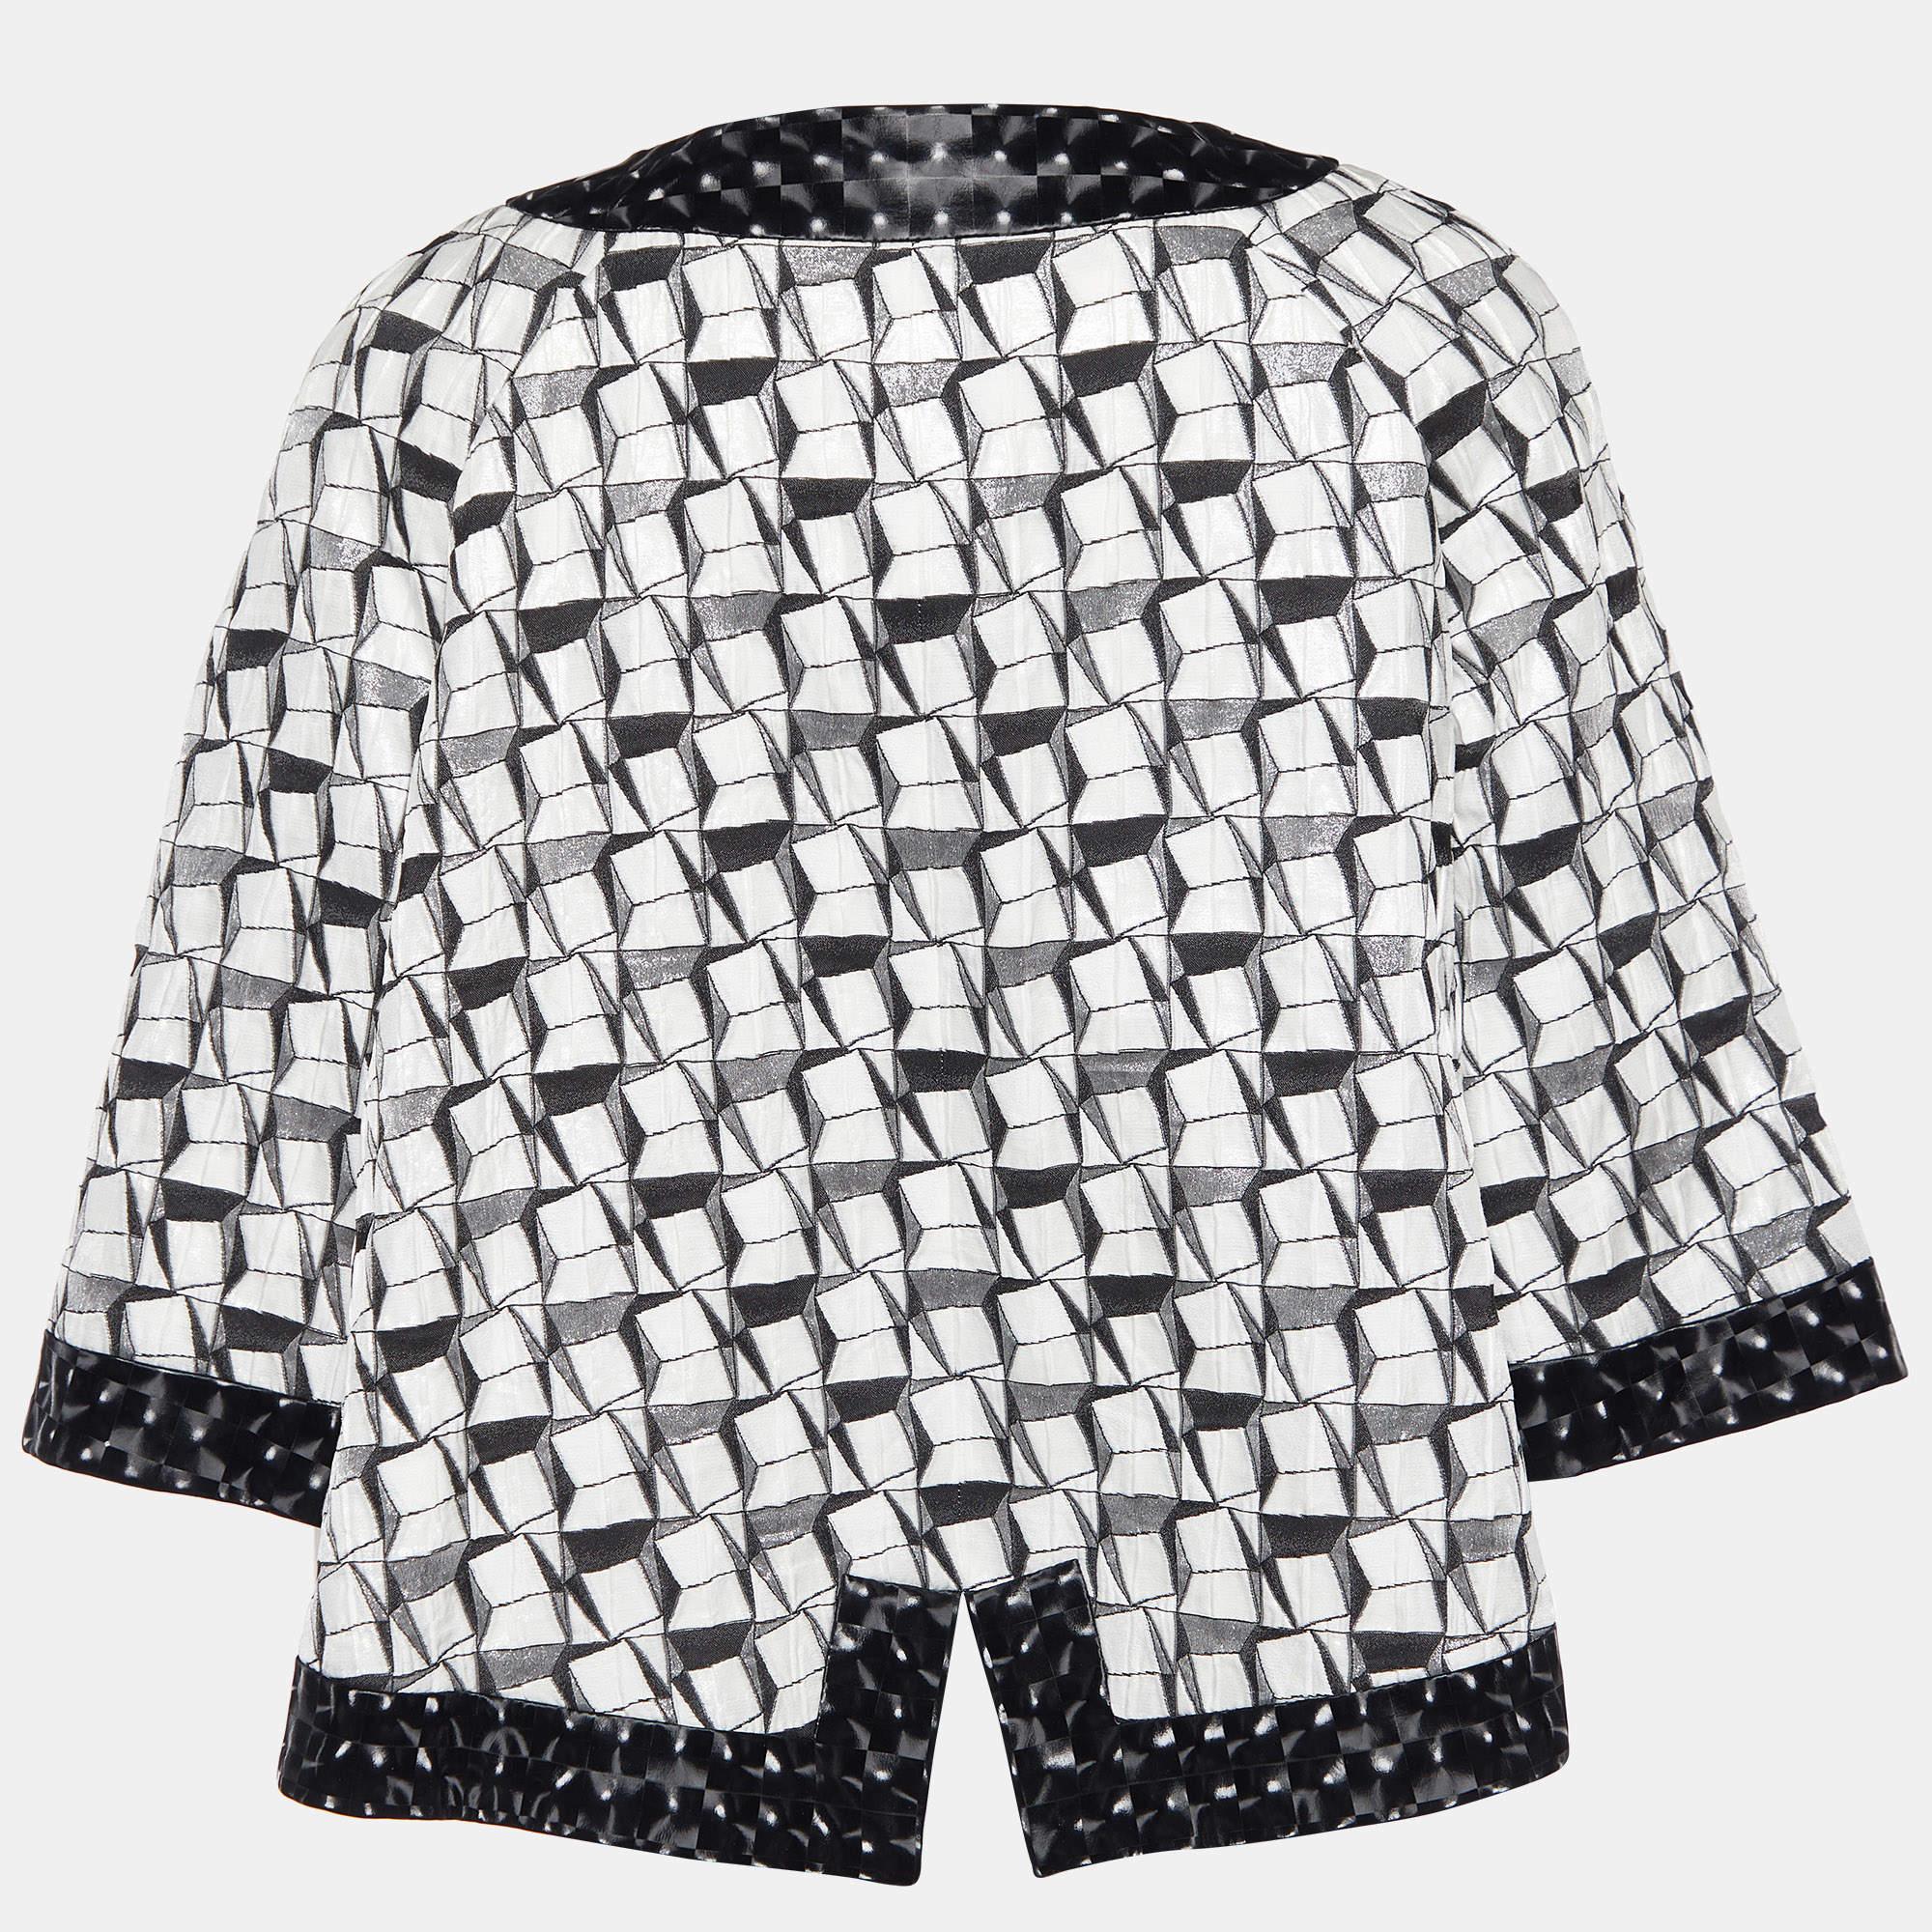 Chanel Black/White Patterned Jacquard Holographic Swing Jacket L In Good Condition For Sale In Dubai, Al Qouz 2